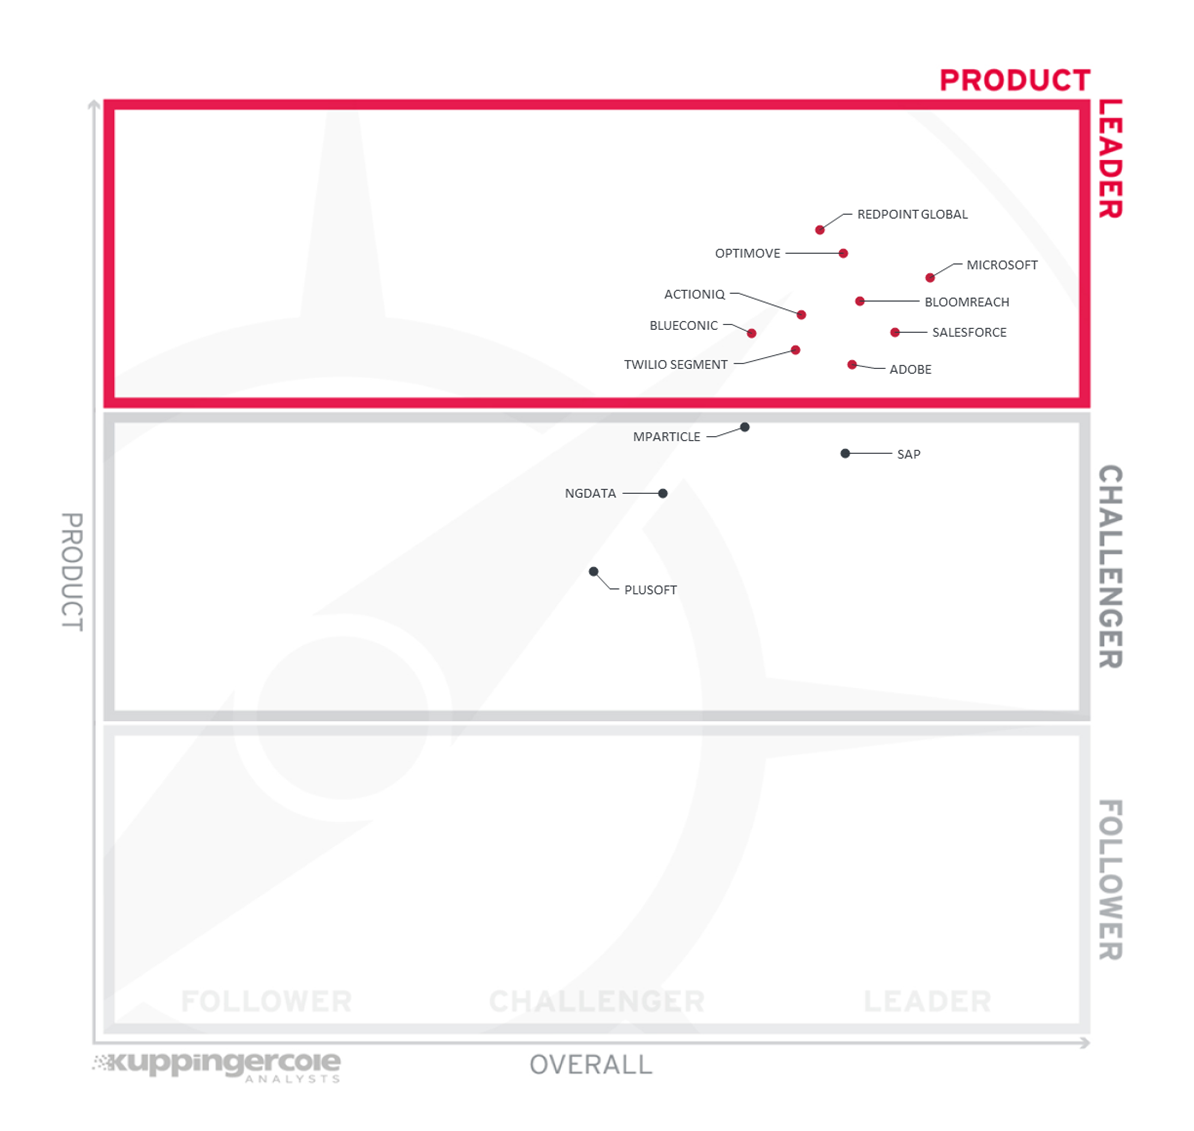 The Product Leadership rating for the LC Customer Data Platforms.